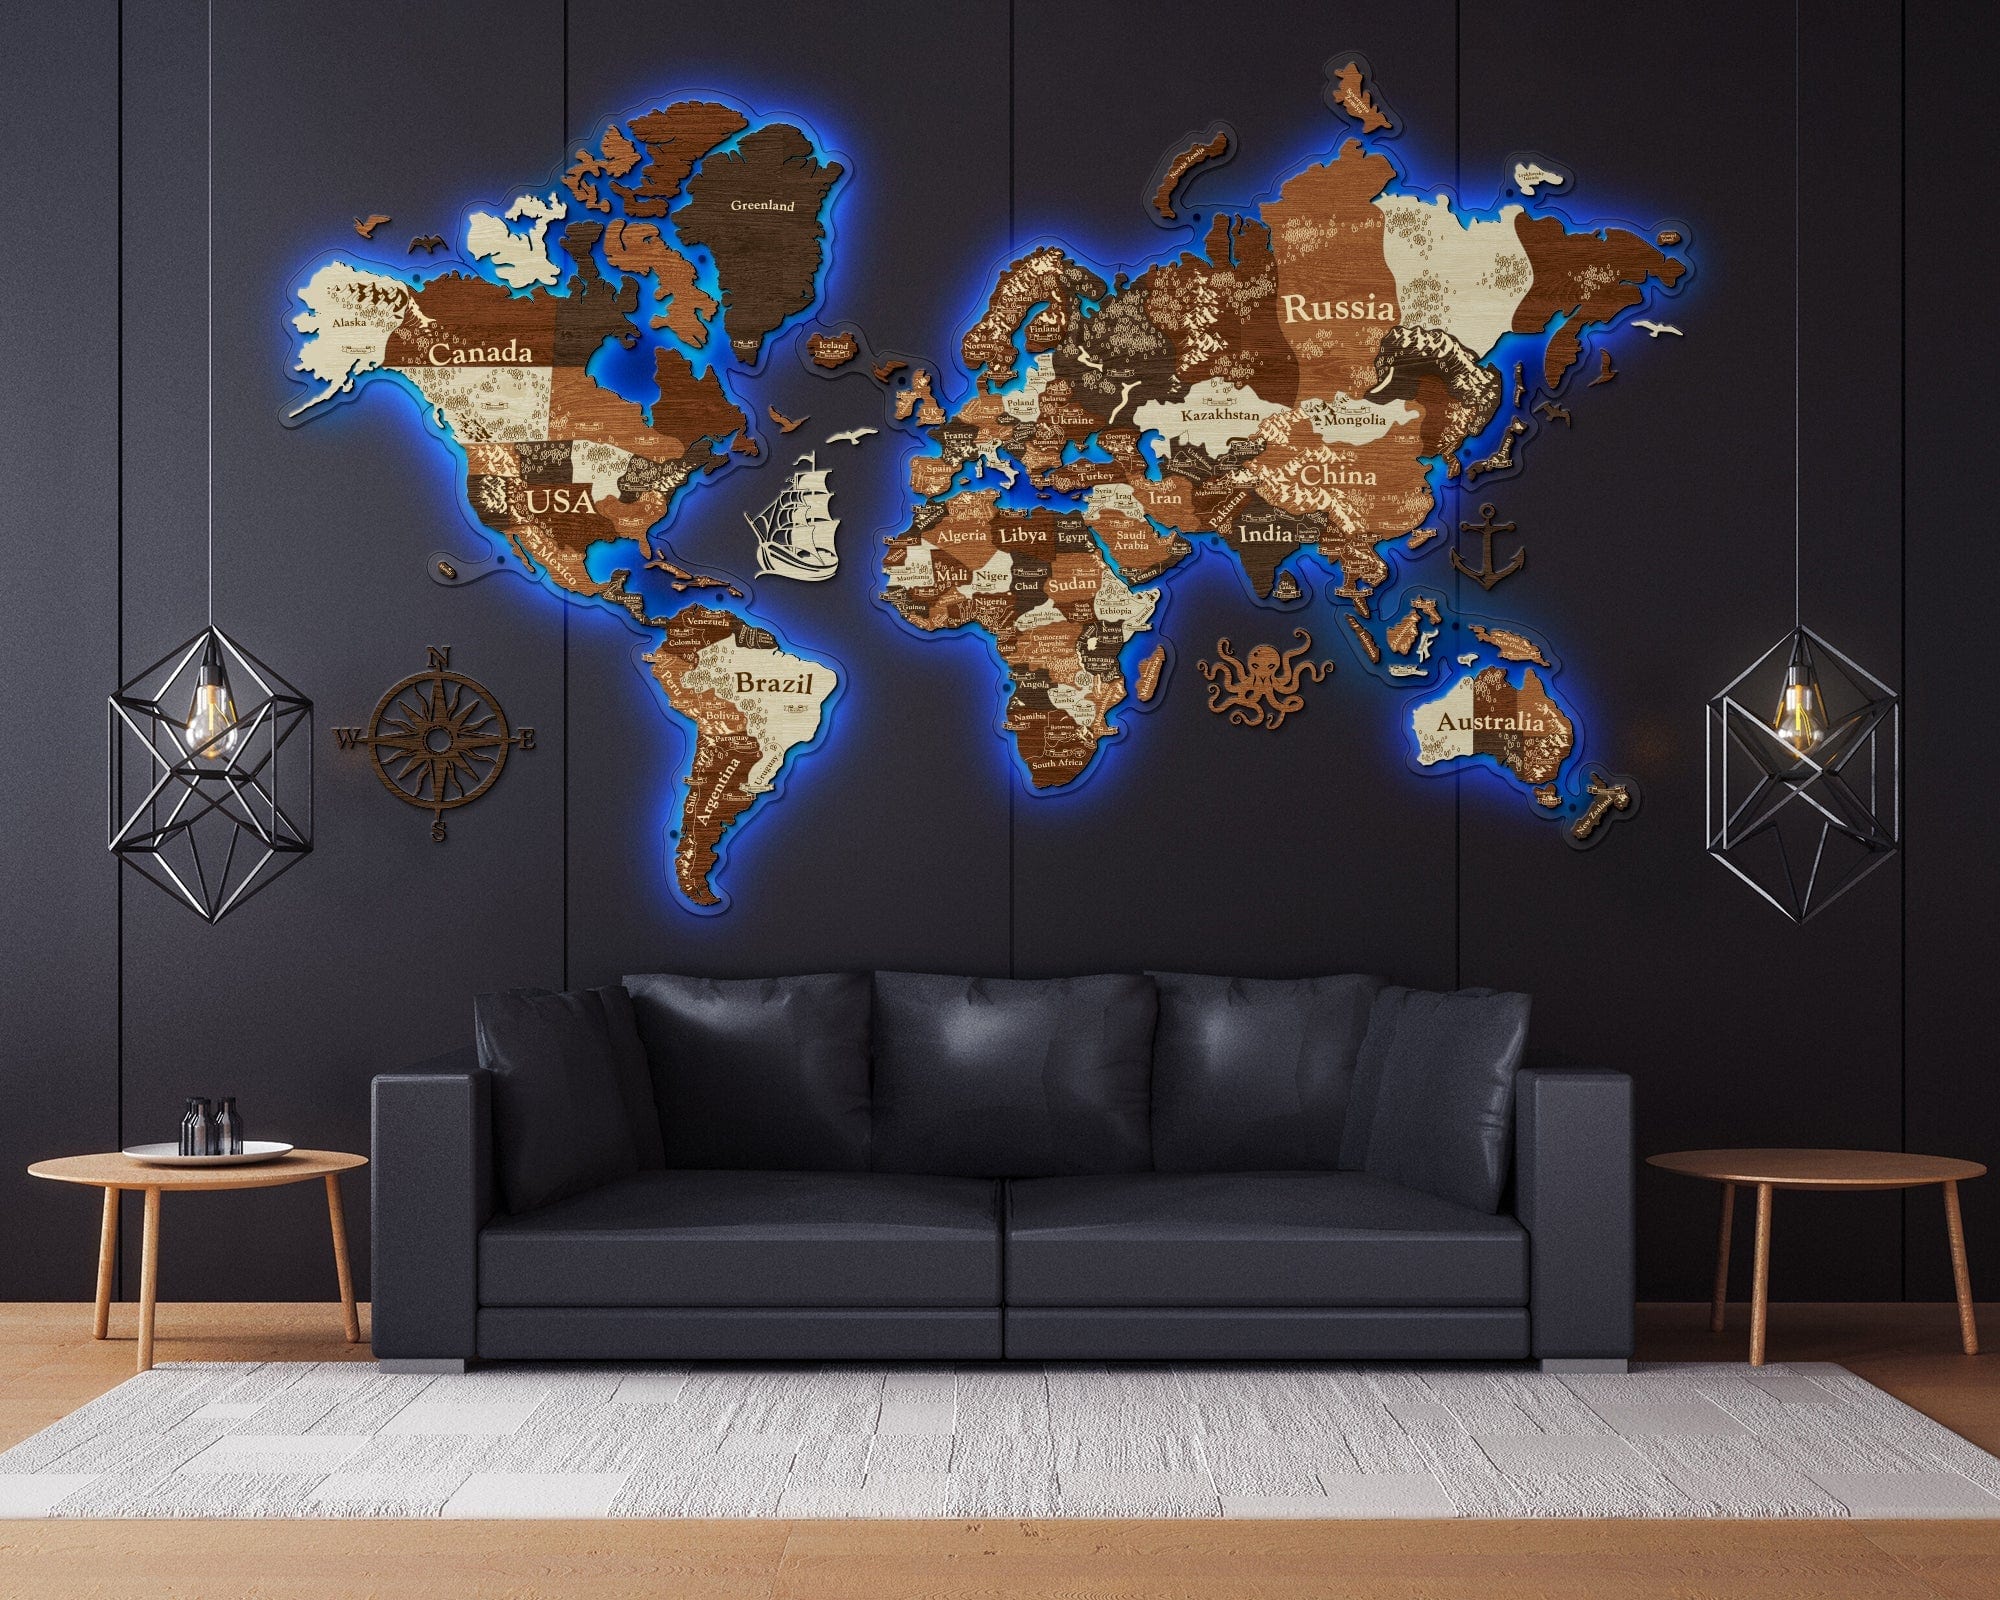 Exquisite Wooden Wall Decor Wooden Paneling Suggestions  World map wall  art, World map wall, World map wall decor